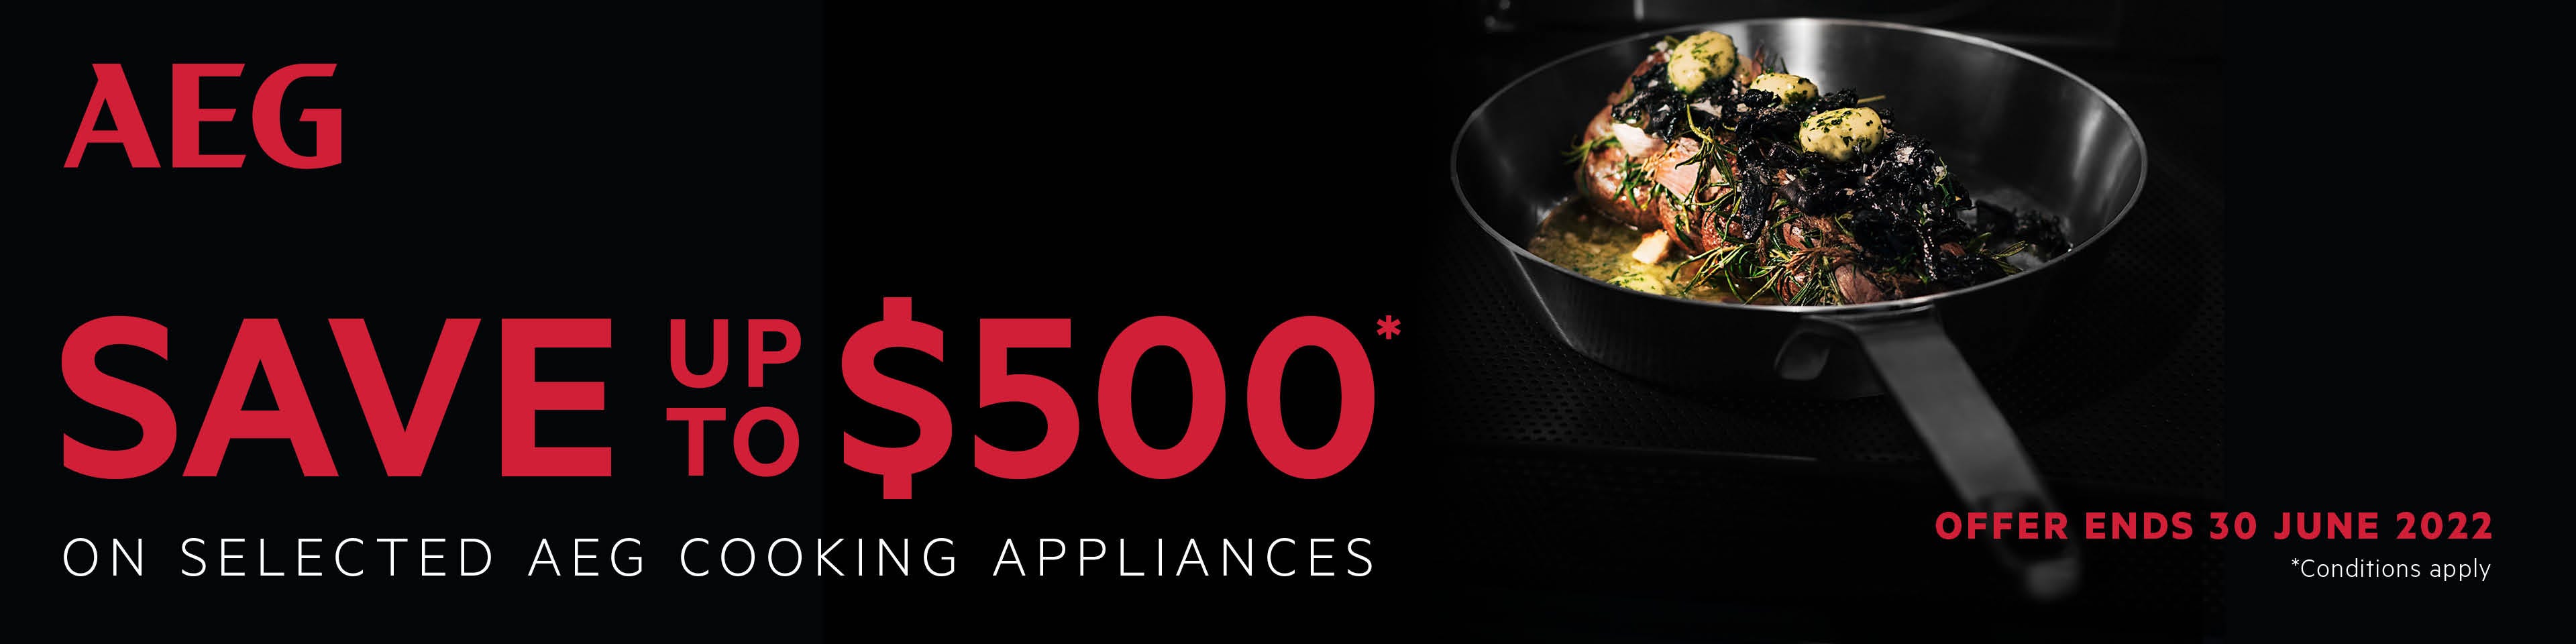  Save on these selected AEG cooking products. Offer ends 30/06/22. Find out more at an e&s near you today.